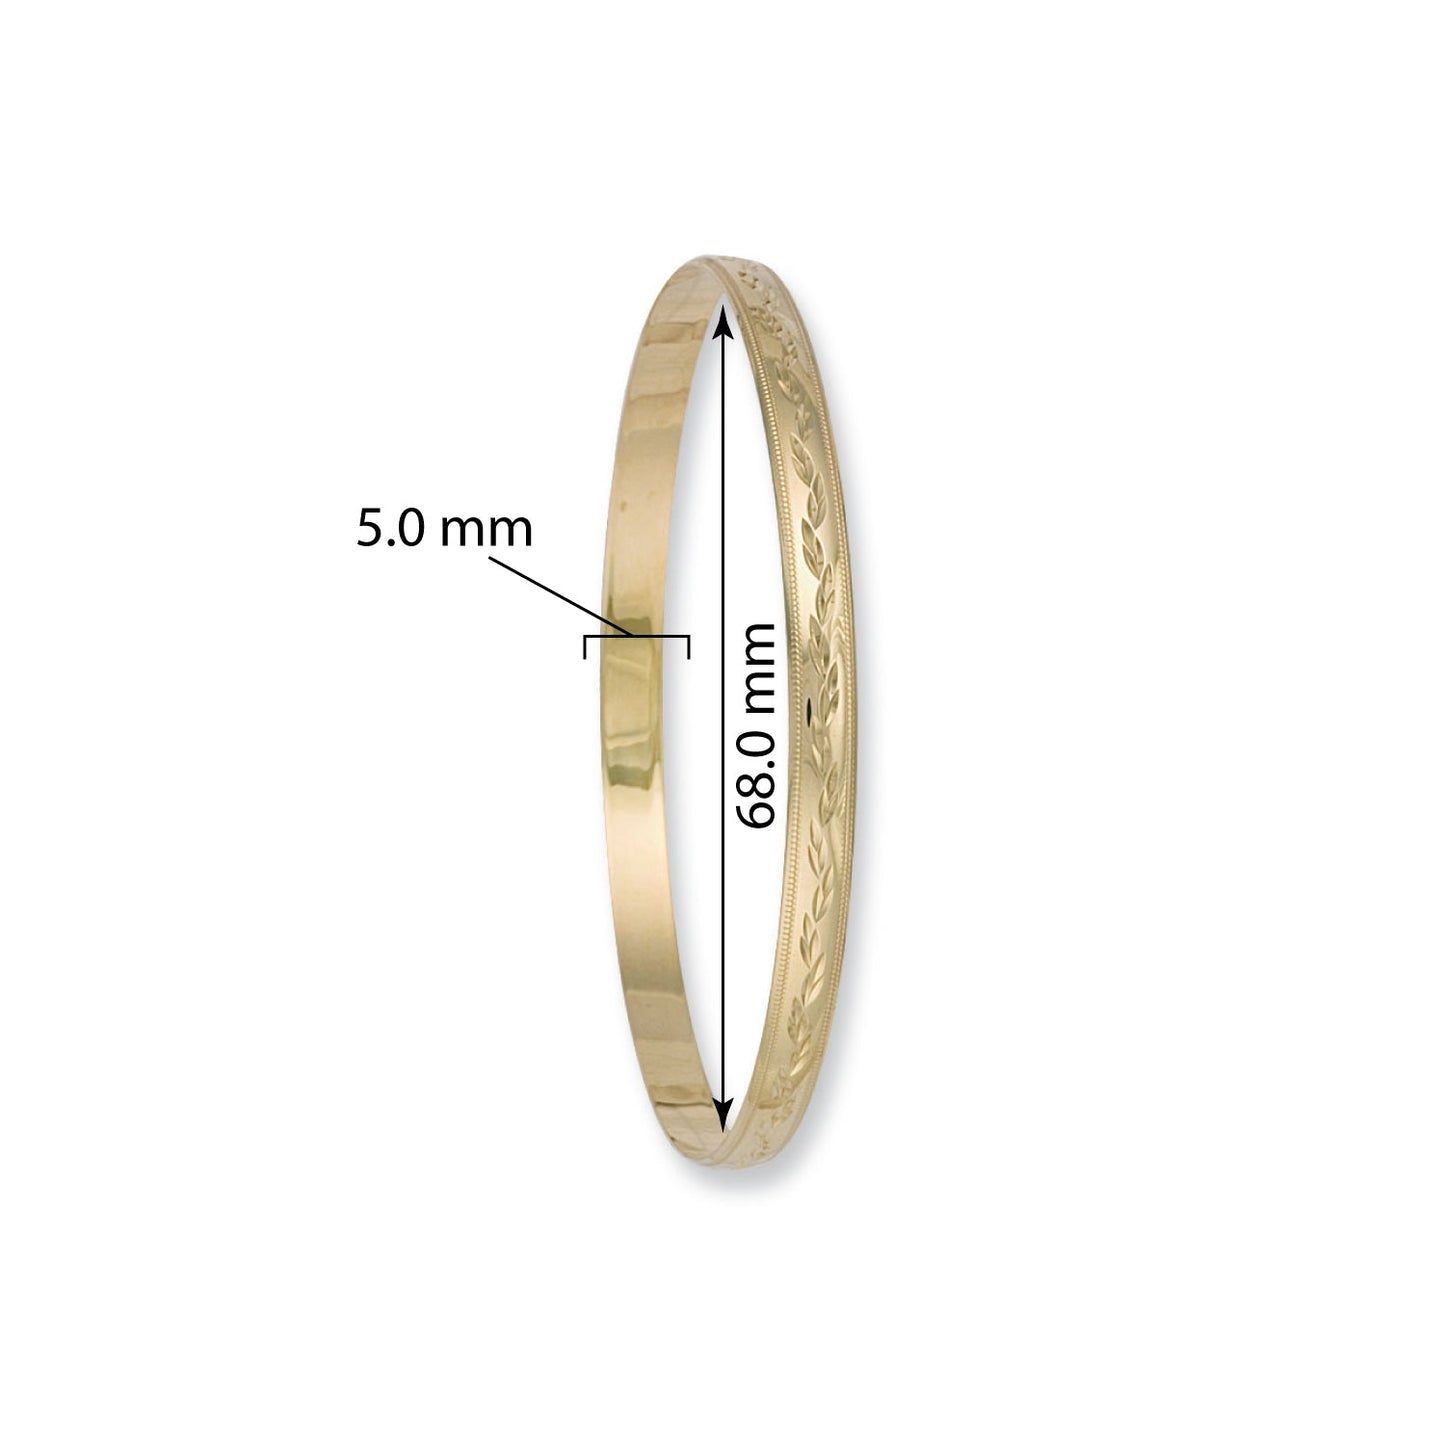 9ct Yellow Gold Slave Bangle 5mm - FJewellery